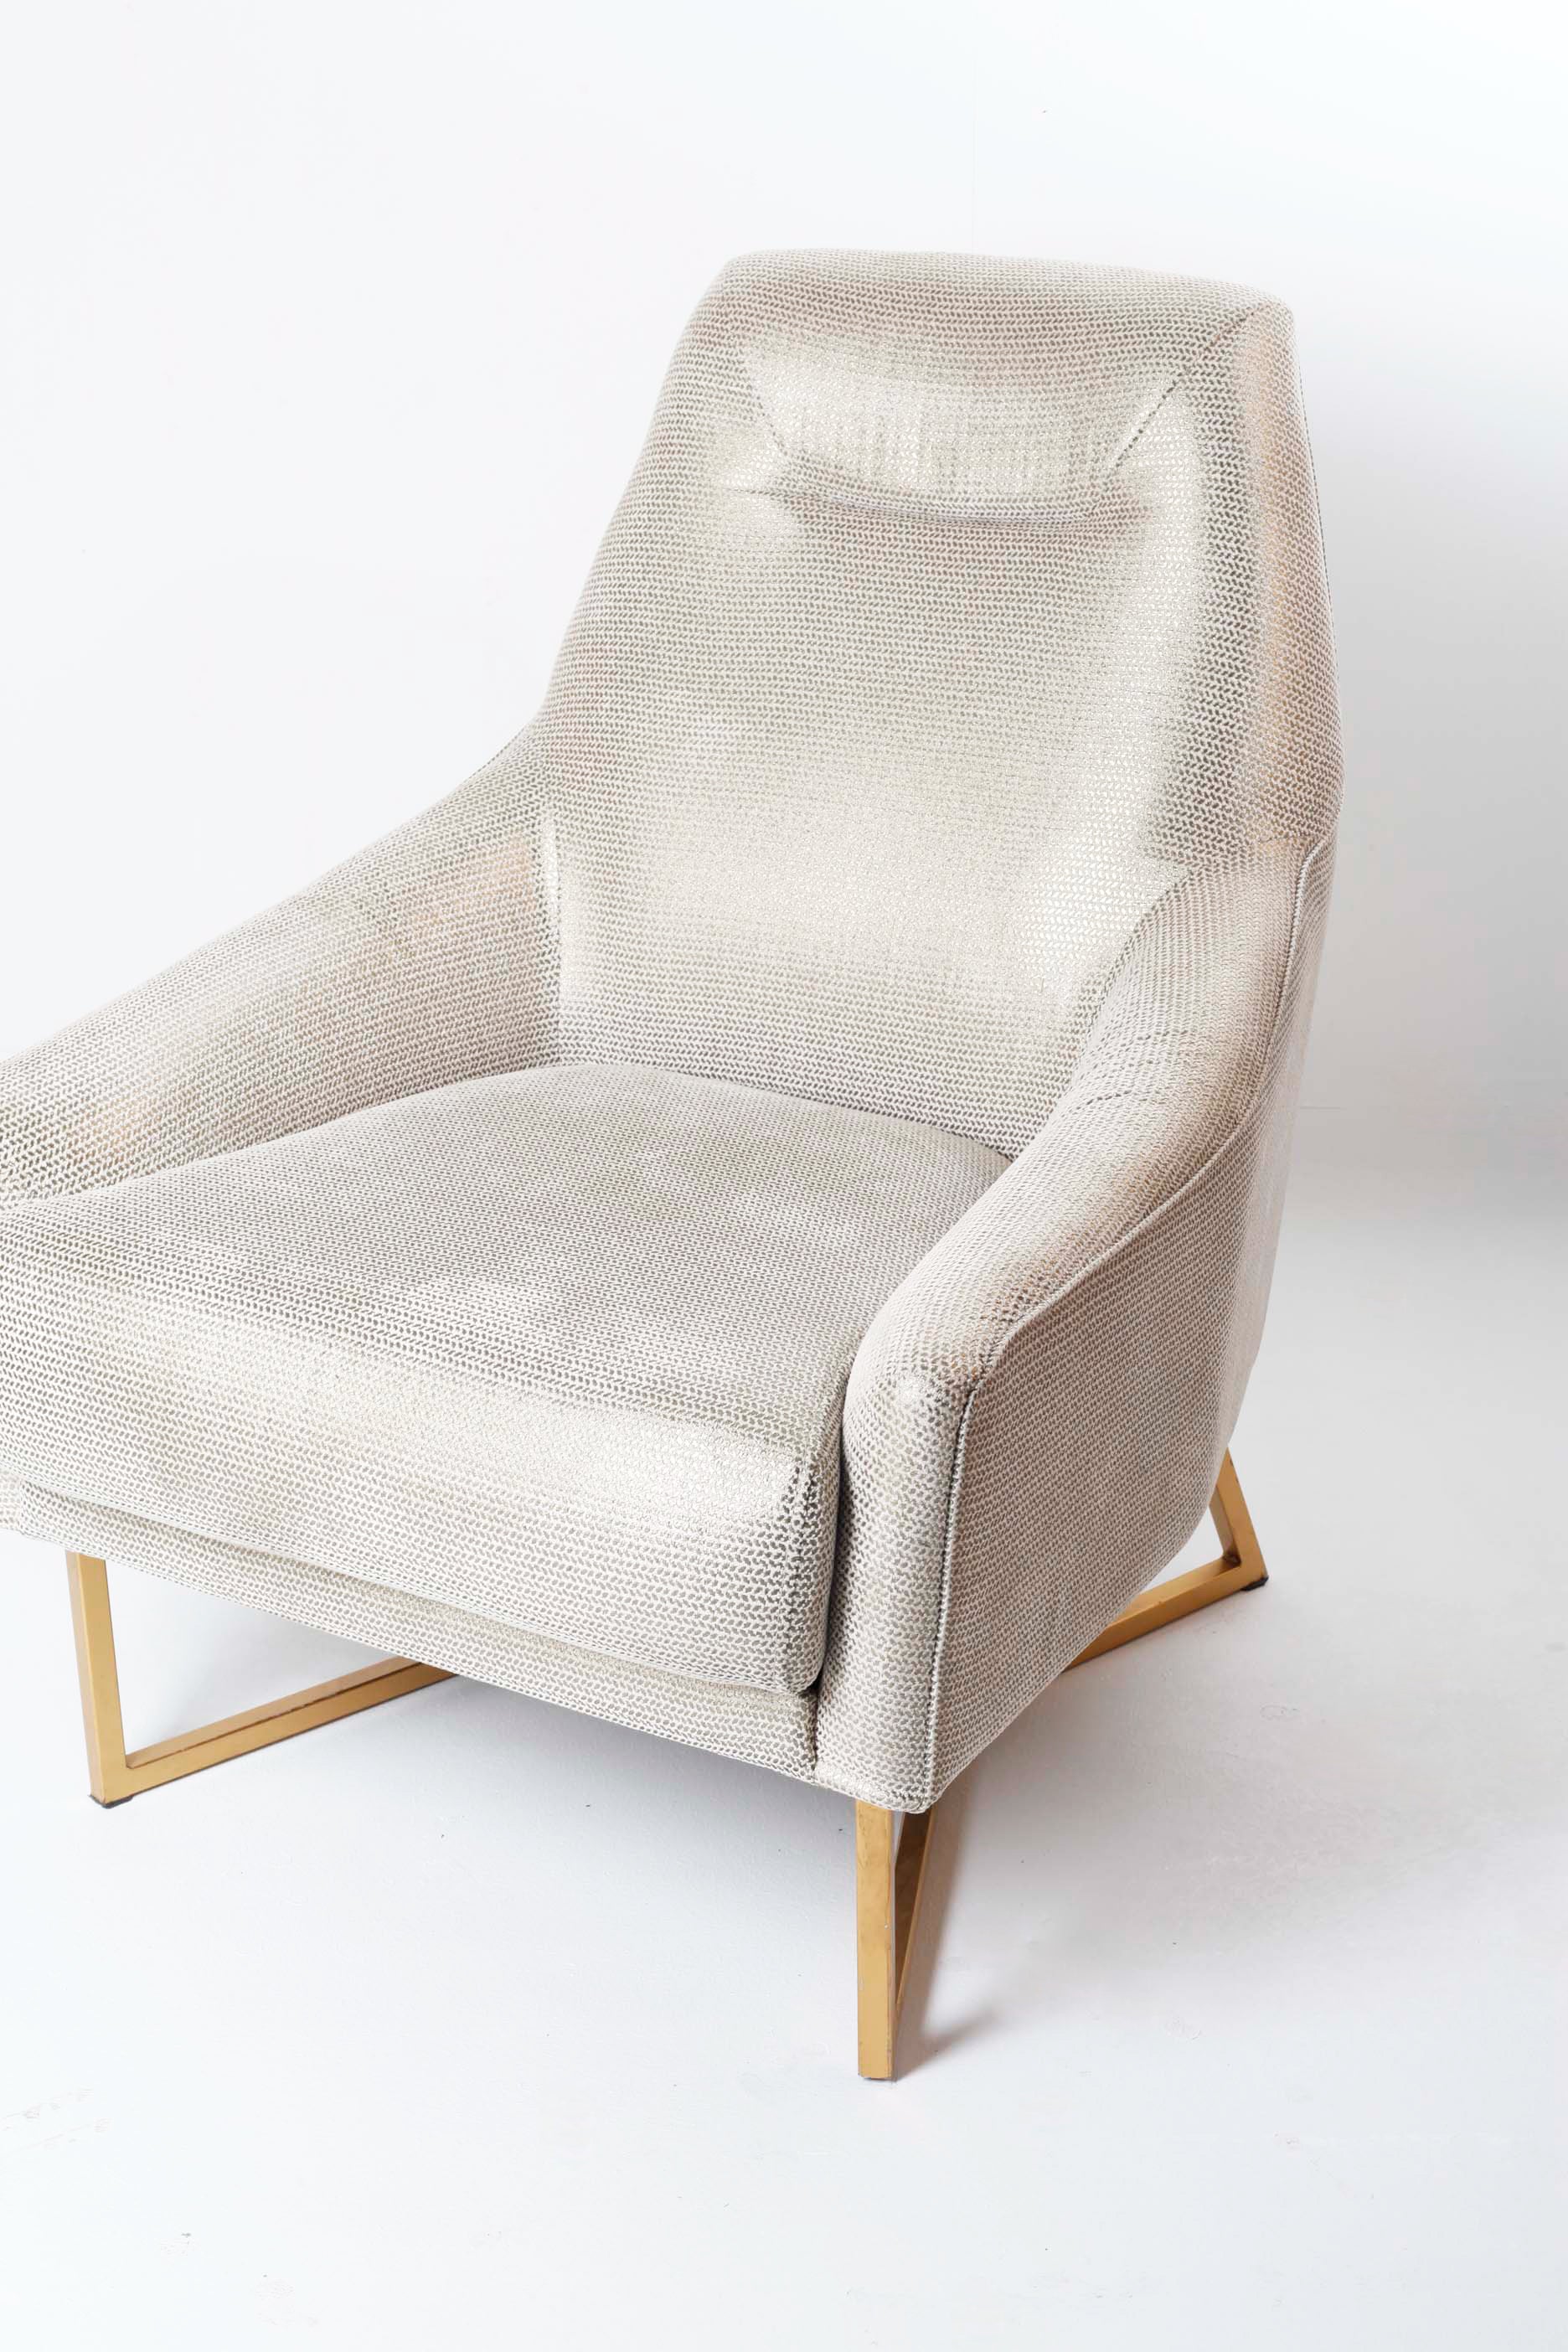 GREY ARMCHAIR WITH GOLD SPECKLES & LEGS (2 pieces available)